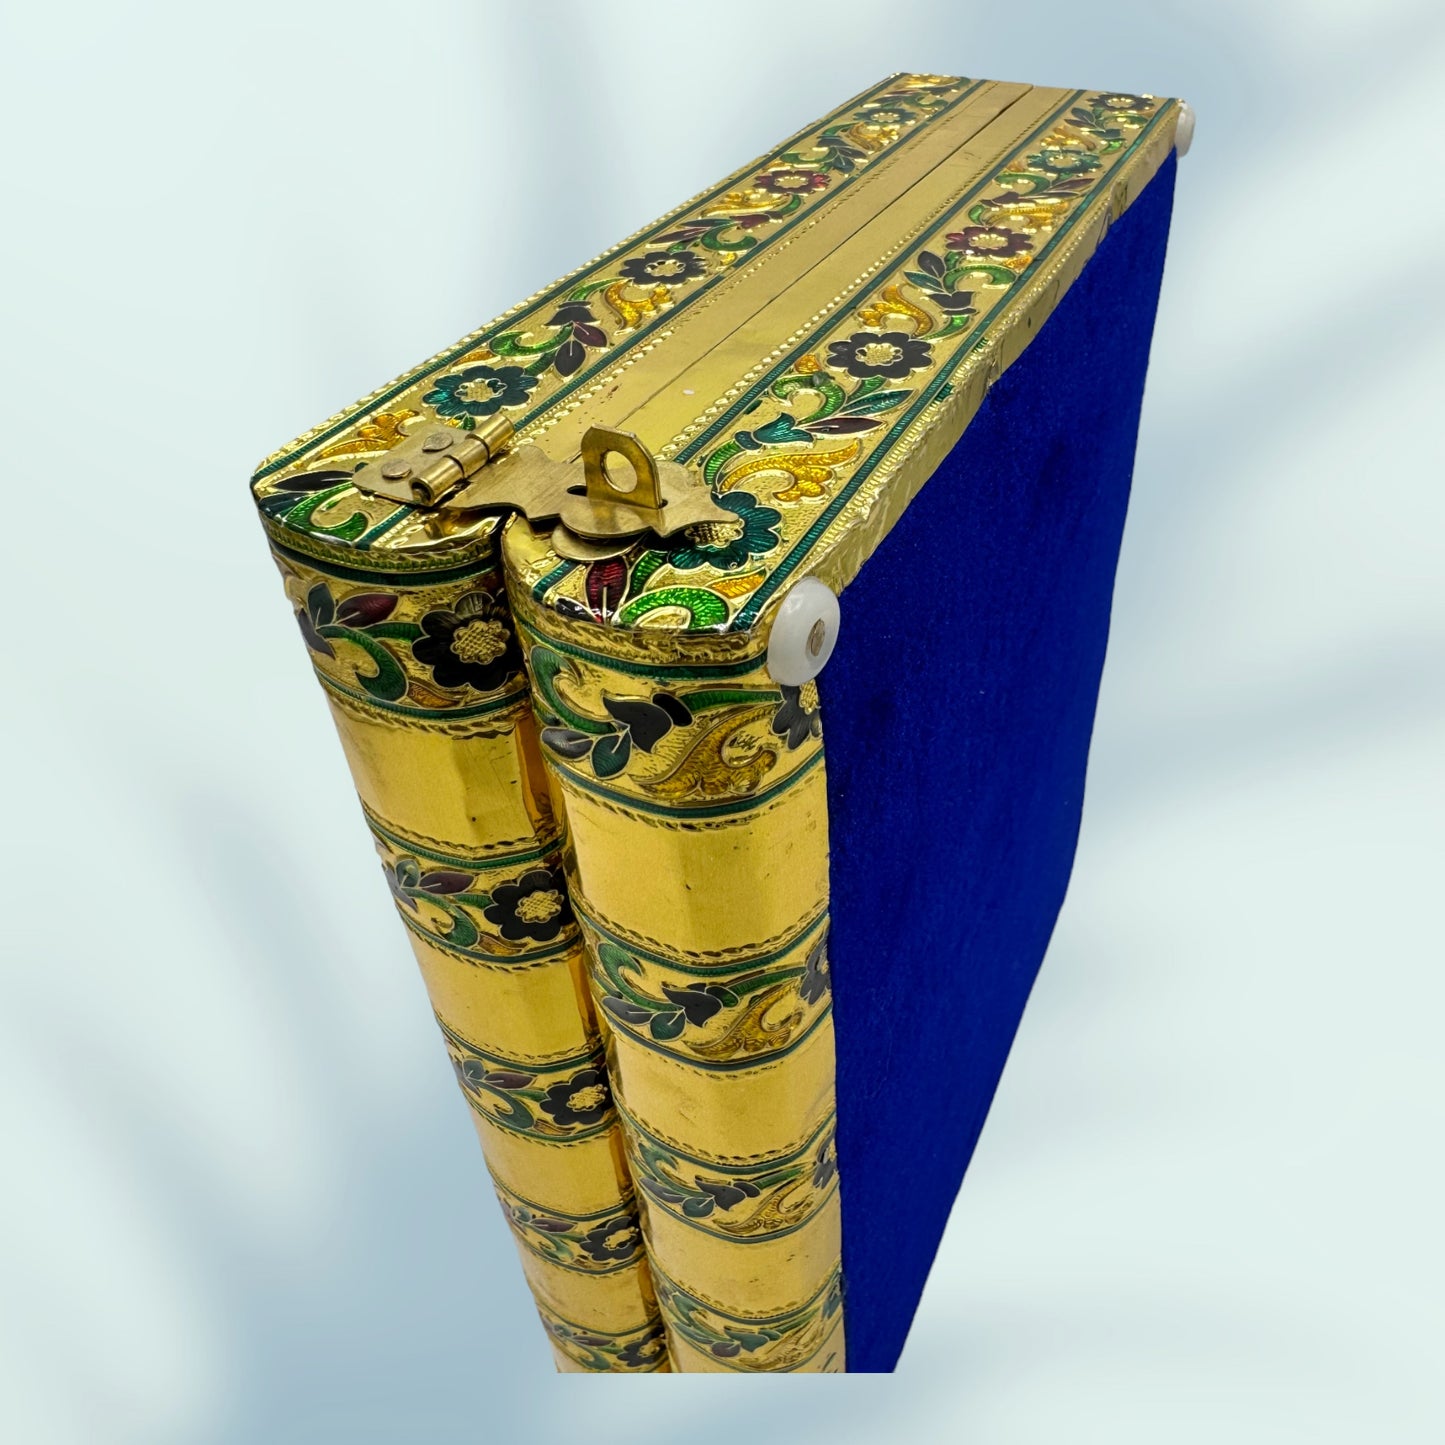 regal peacock meenakari jewelry box has velvet lining on the bottom surface shown here in royal blue